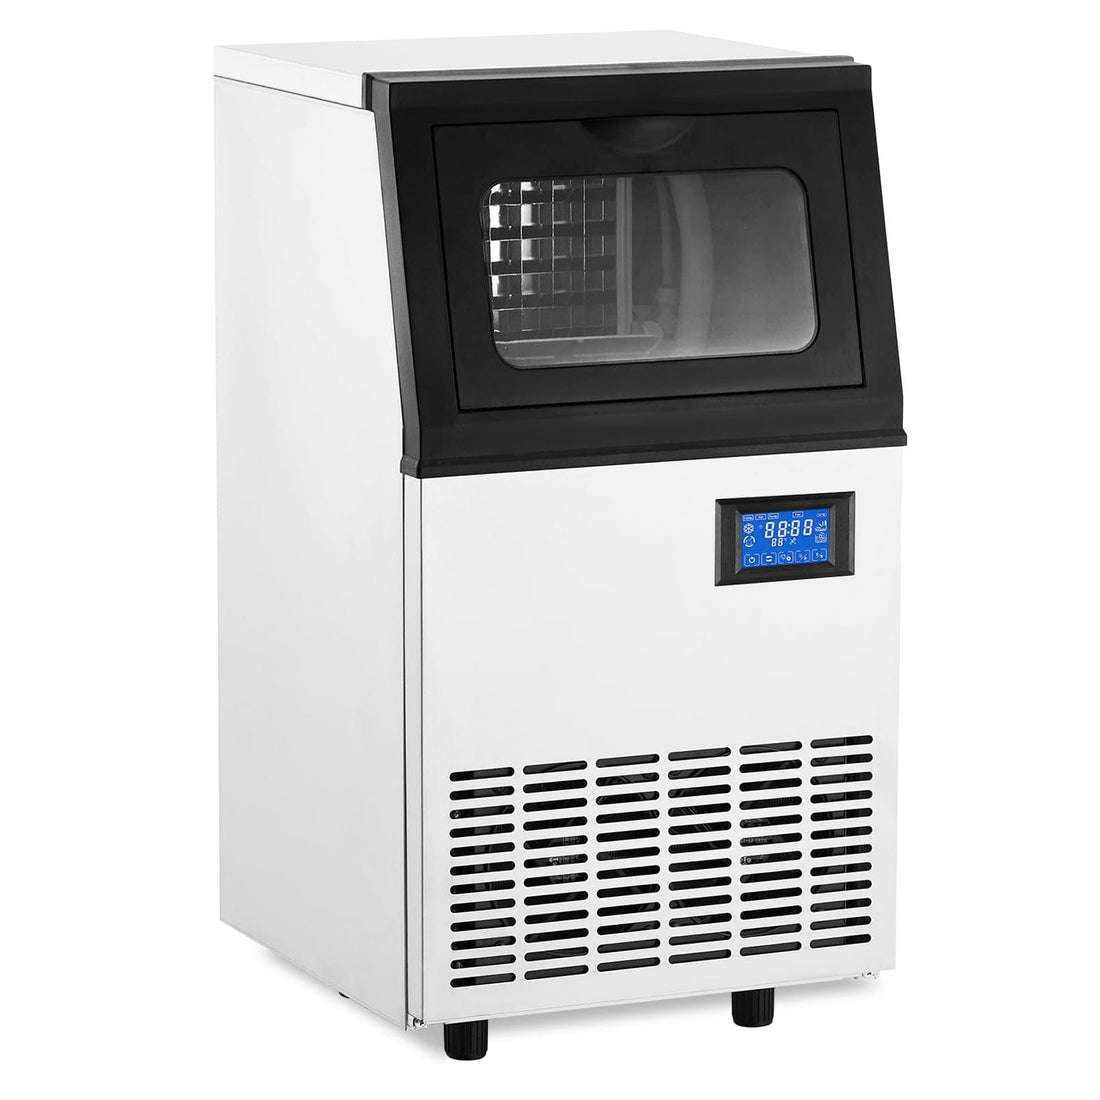 GARVEE 84Lbs/24H, Ice Maker, 25Lbs Storage, Self-Cleaning, Stainless, Freestanding/Under Counter, Great for Restaurant/Bar/Cafe/Shop/Home/Office